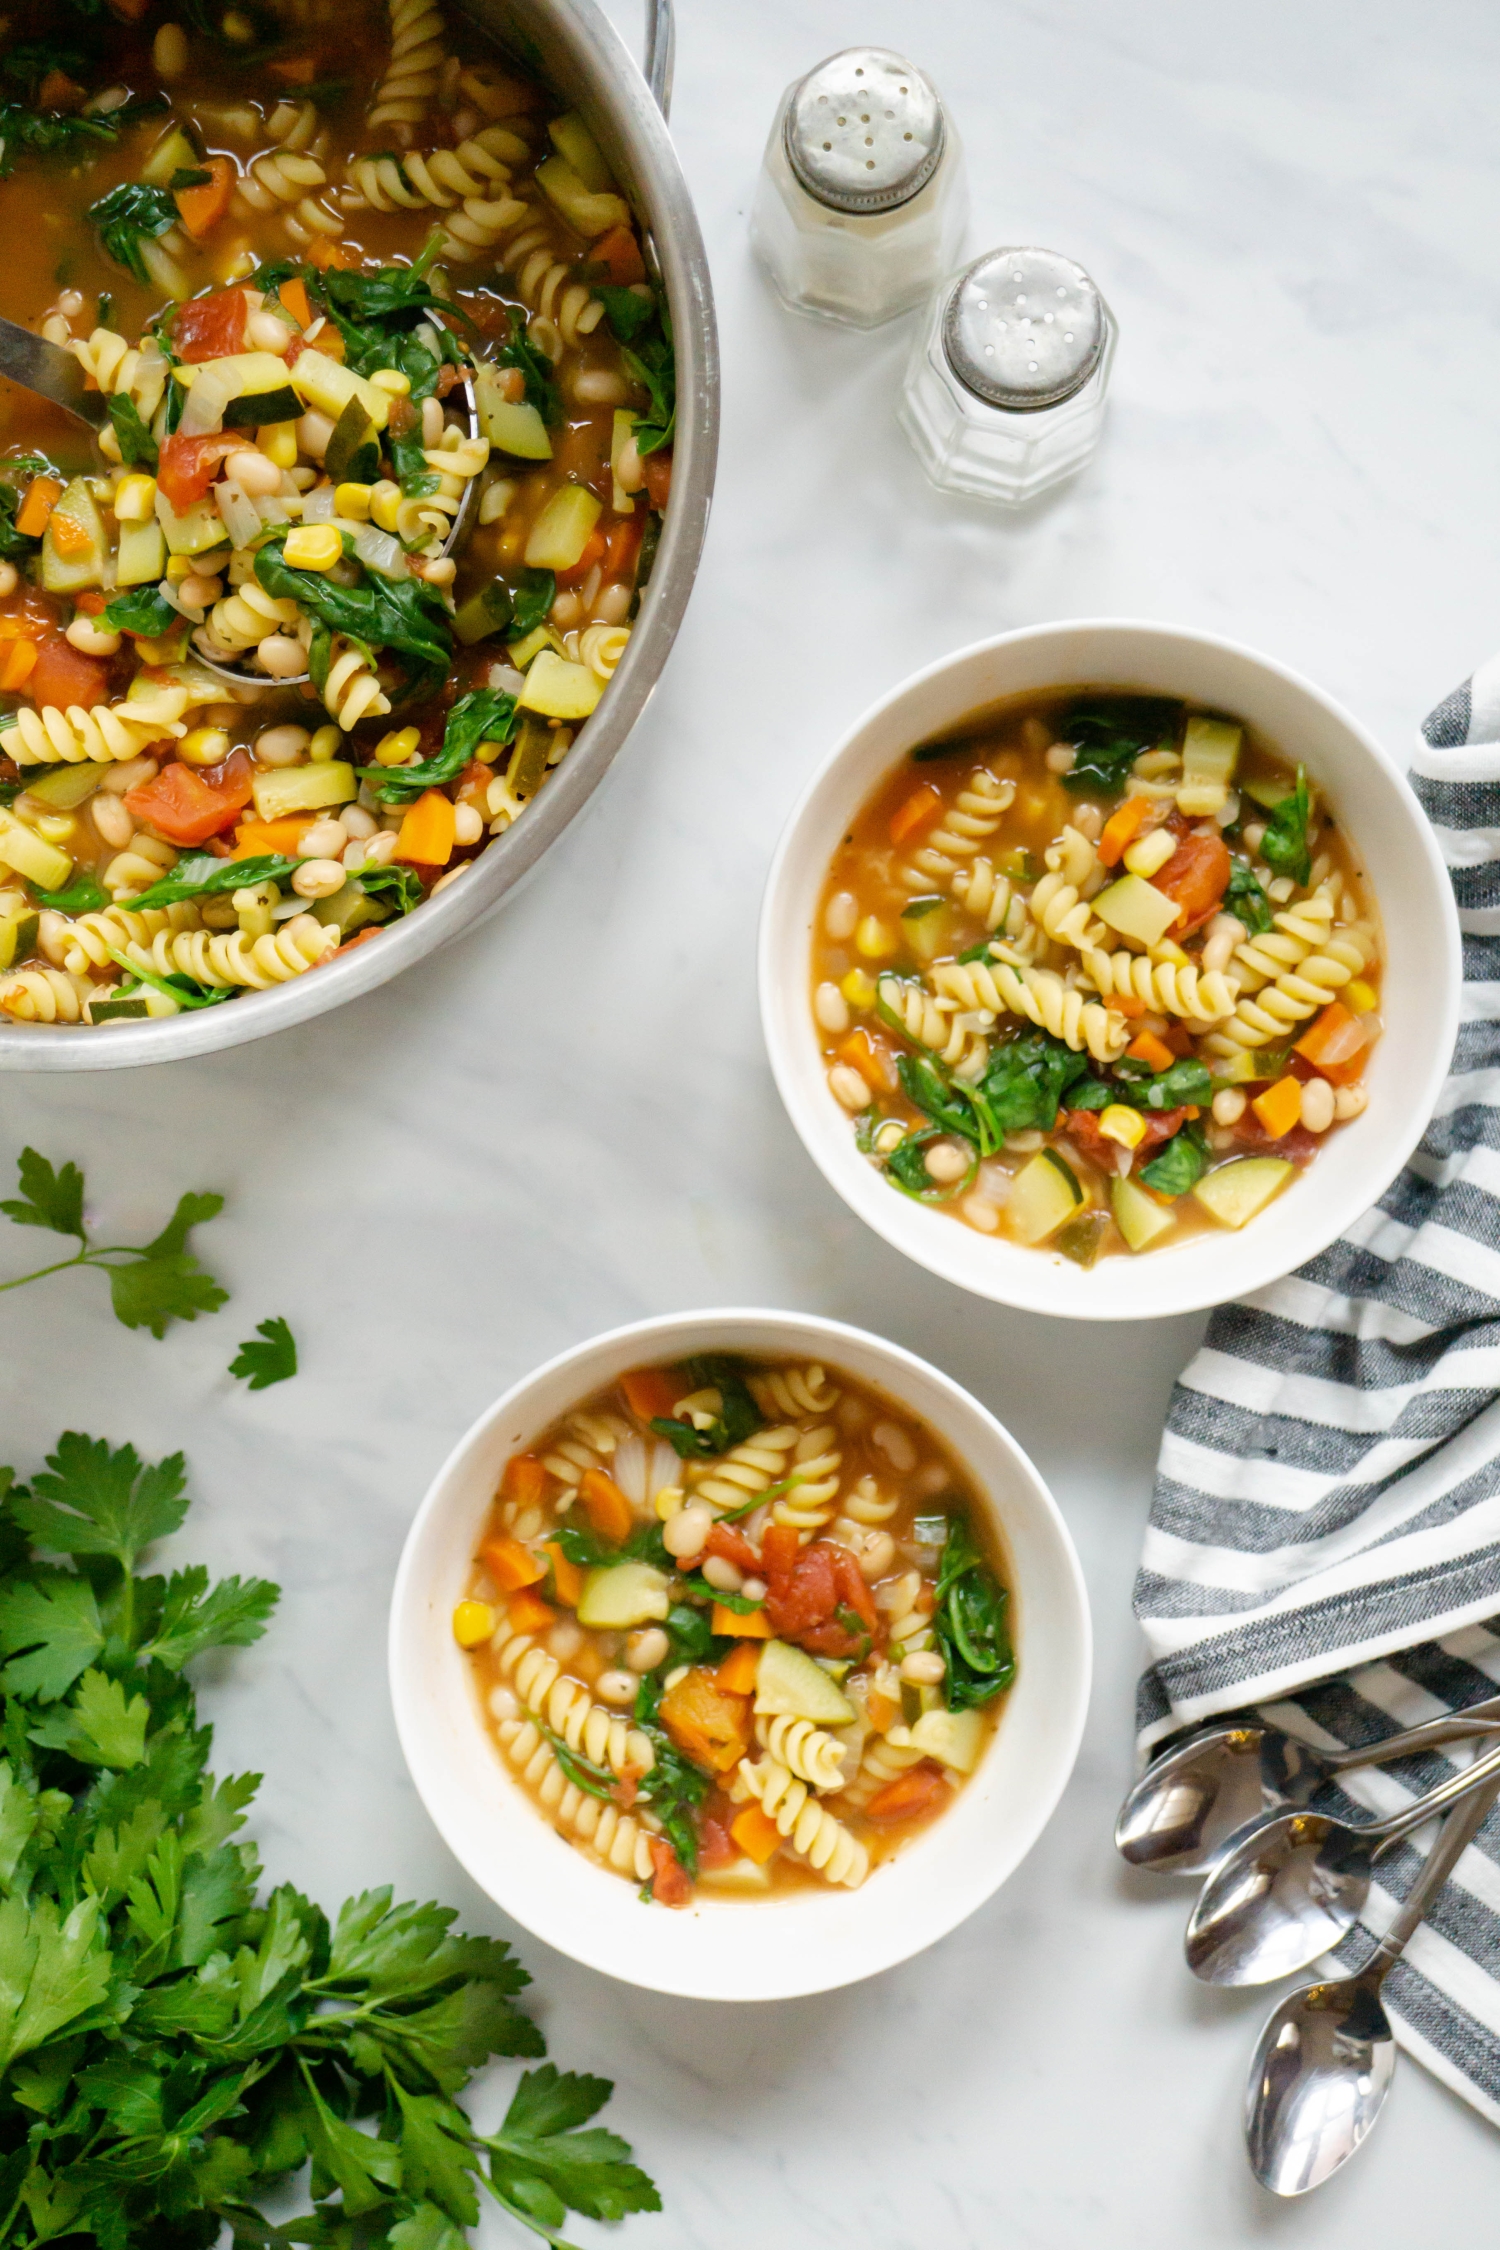 Garden minestrone soup in two bowls with fresh vegetables, pasta, and white beans.